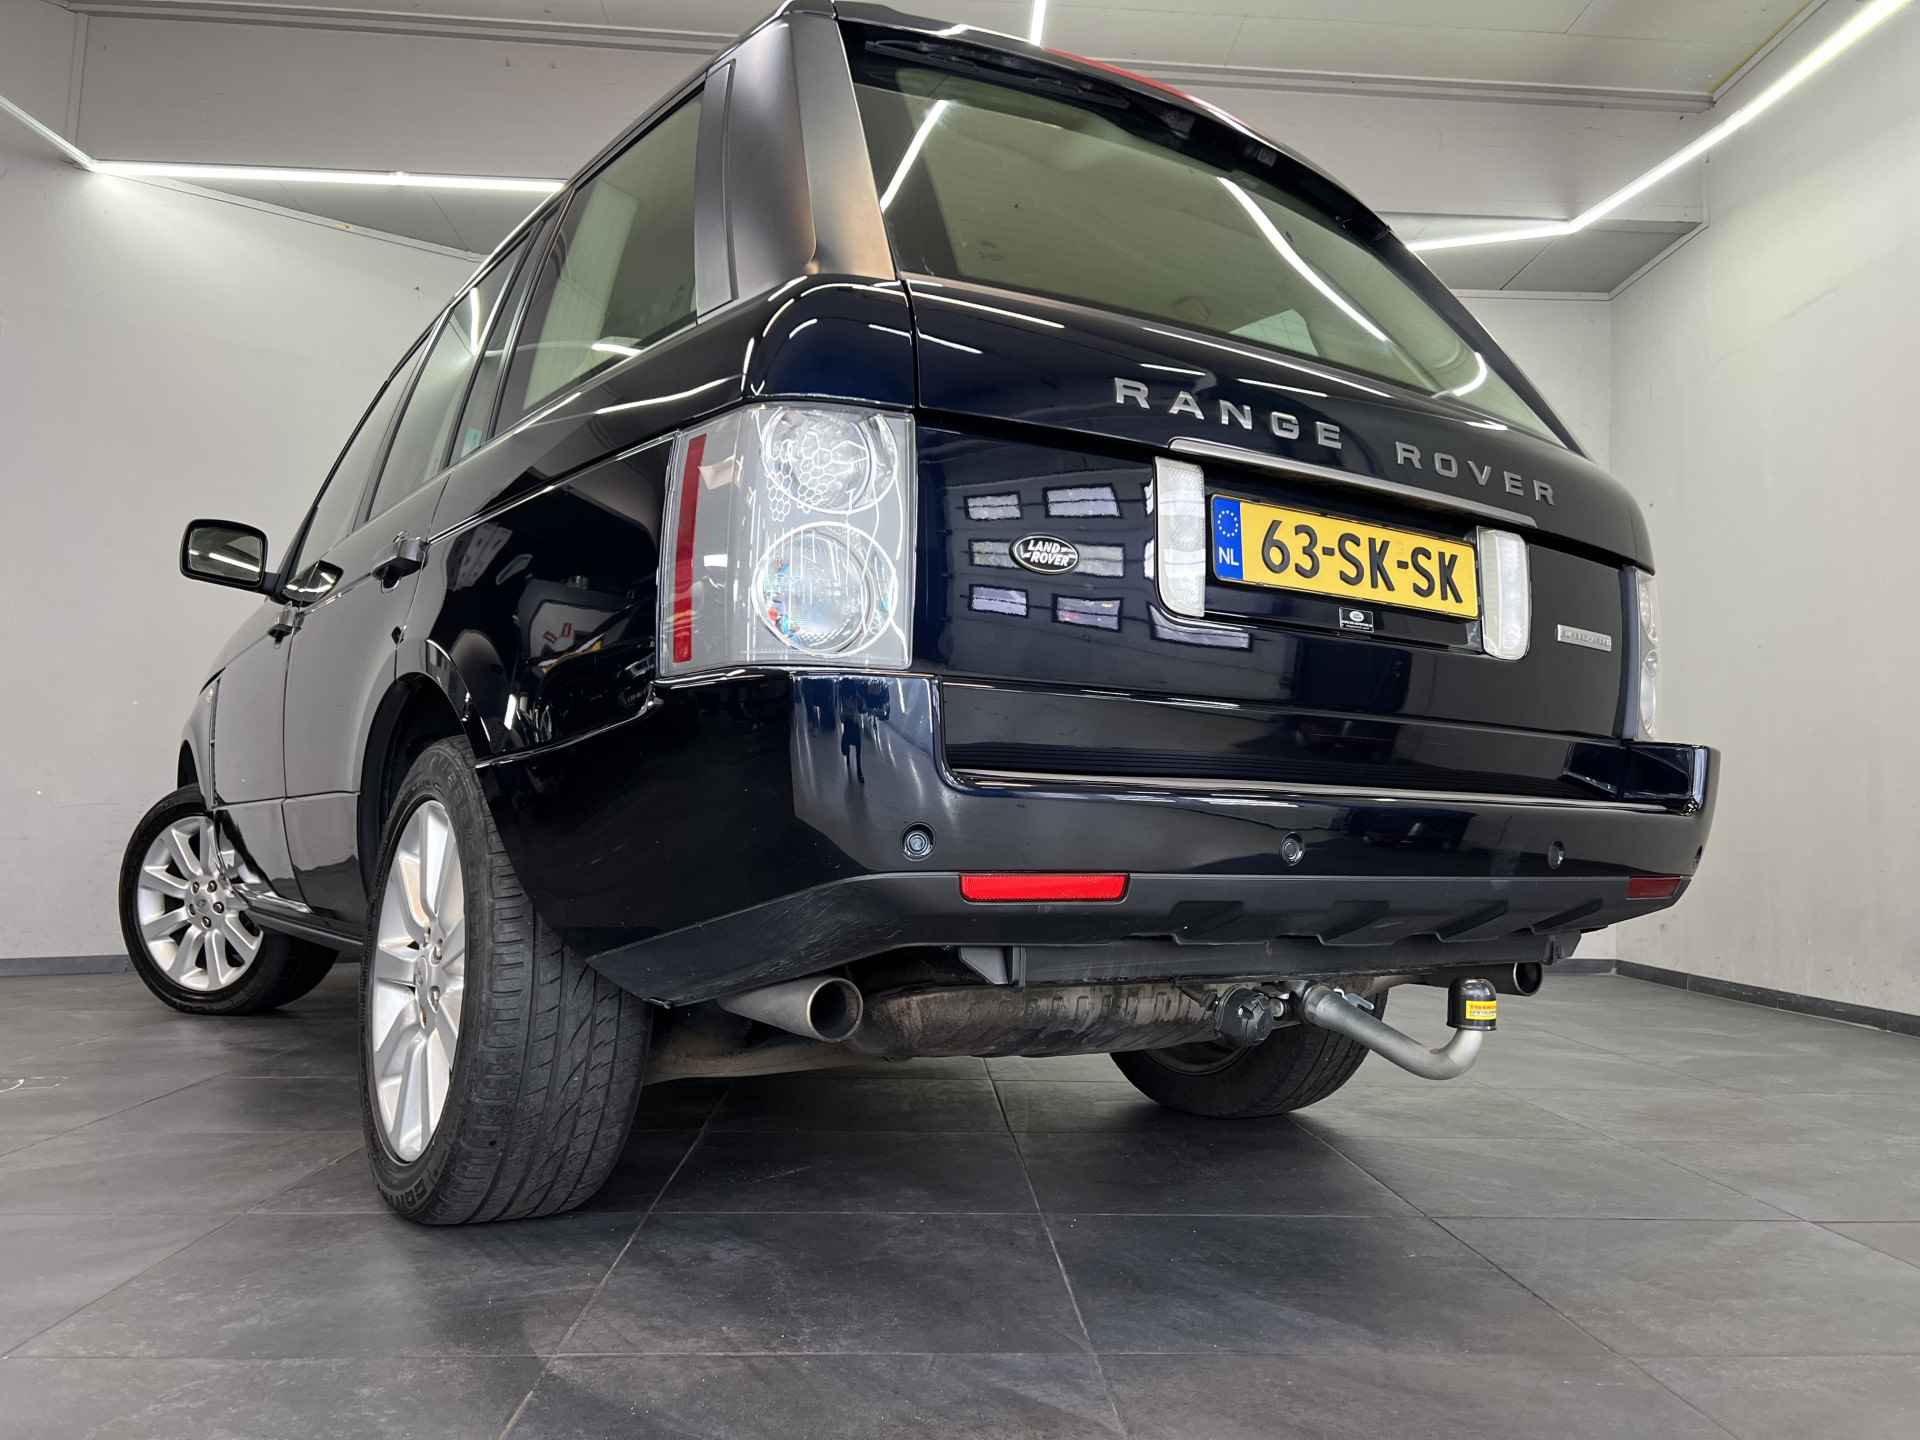 Land Rover Range Rover 4.2 V8 Supercharged ✅UNIEKE STAAT✅Airco✅Cruise controle✅Navigatie✅5 deurs✅TREKHAAK - 11/52